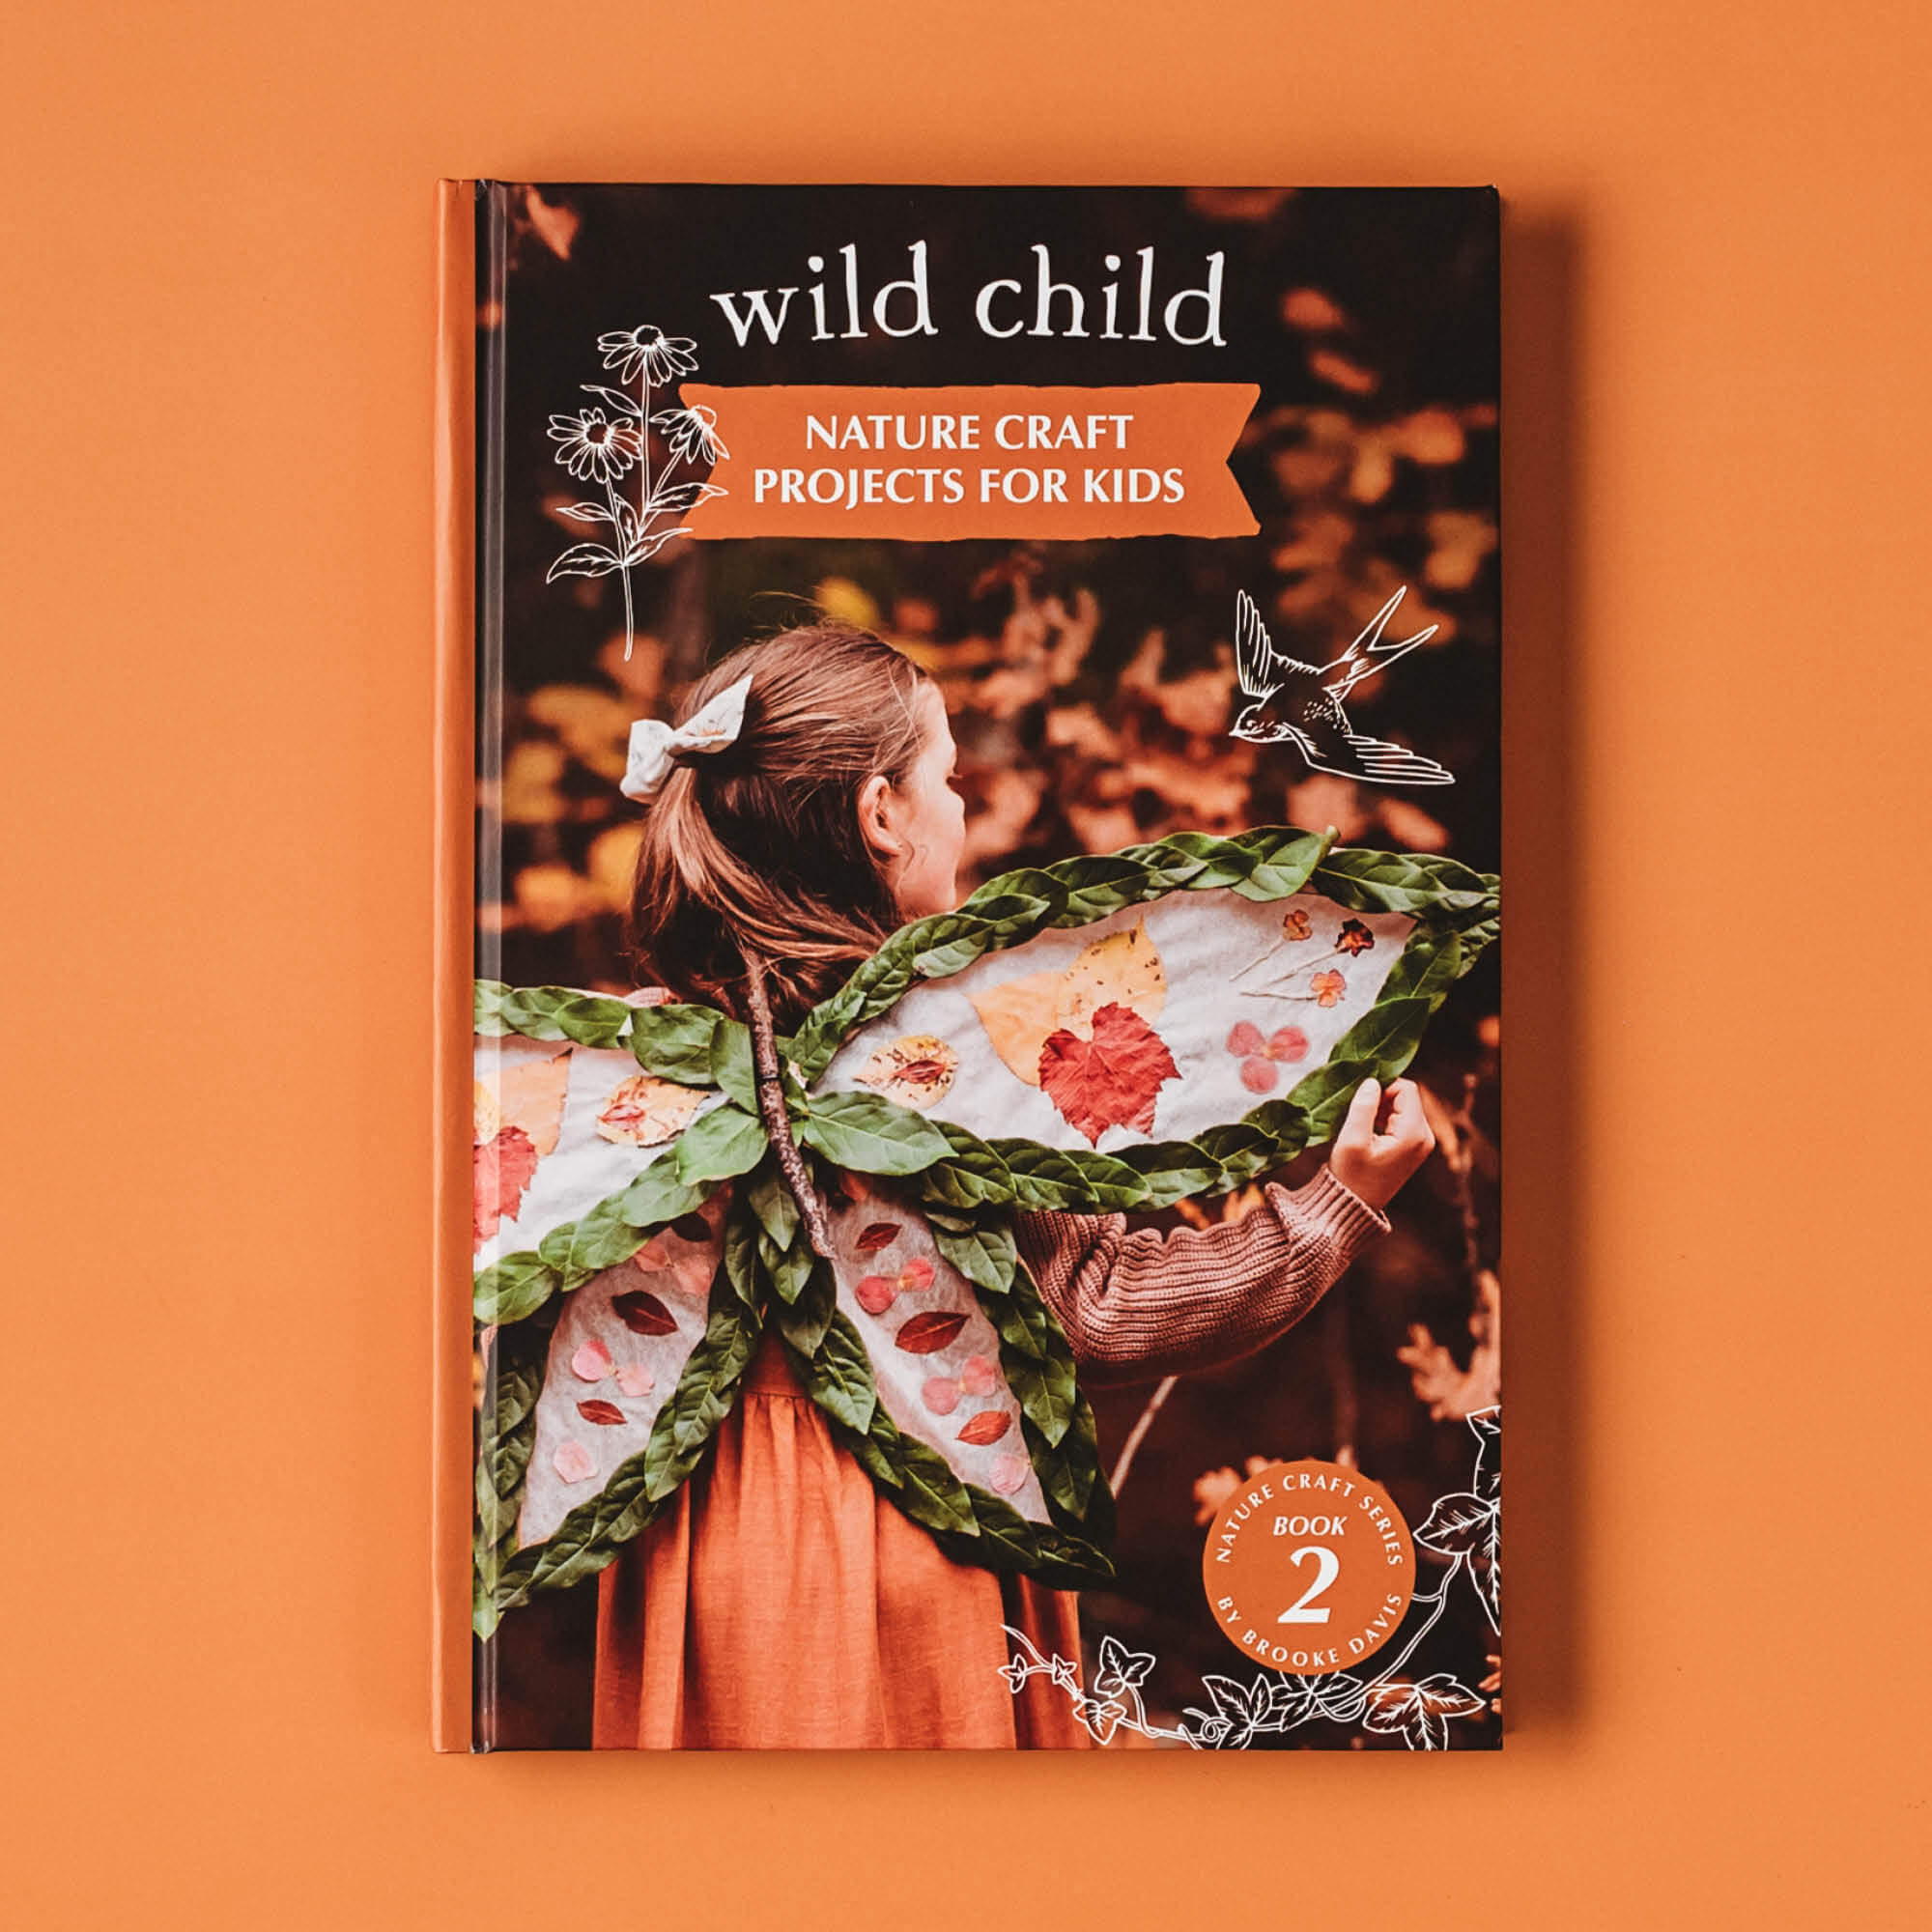 projects　Wild　Your　Nature　Child　Book　for　craft　years　kids　3-12　Wild　Books